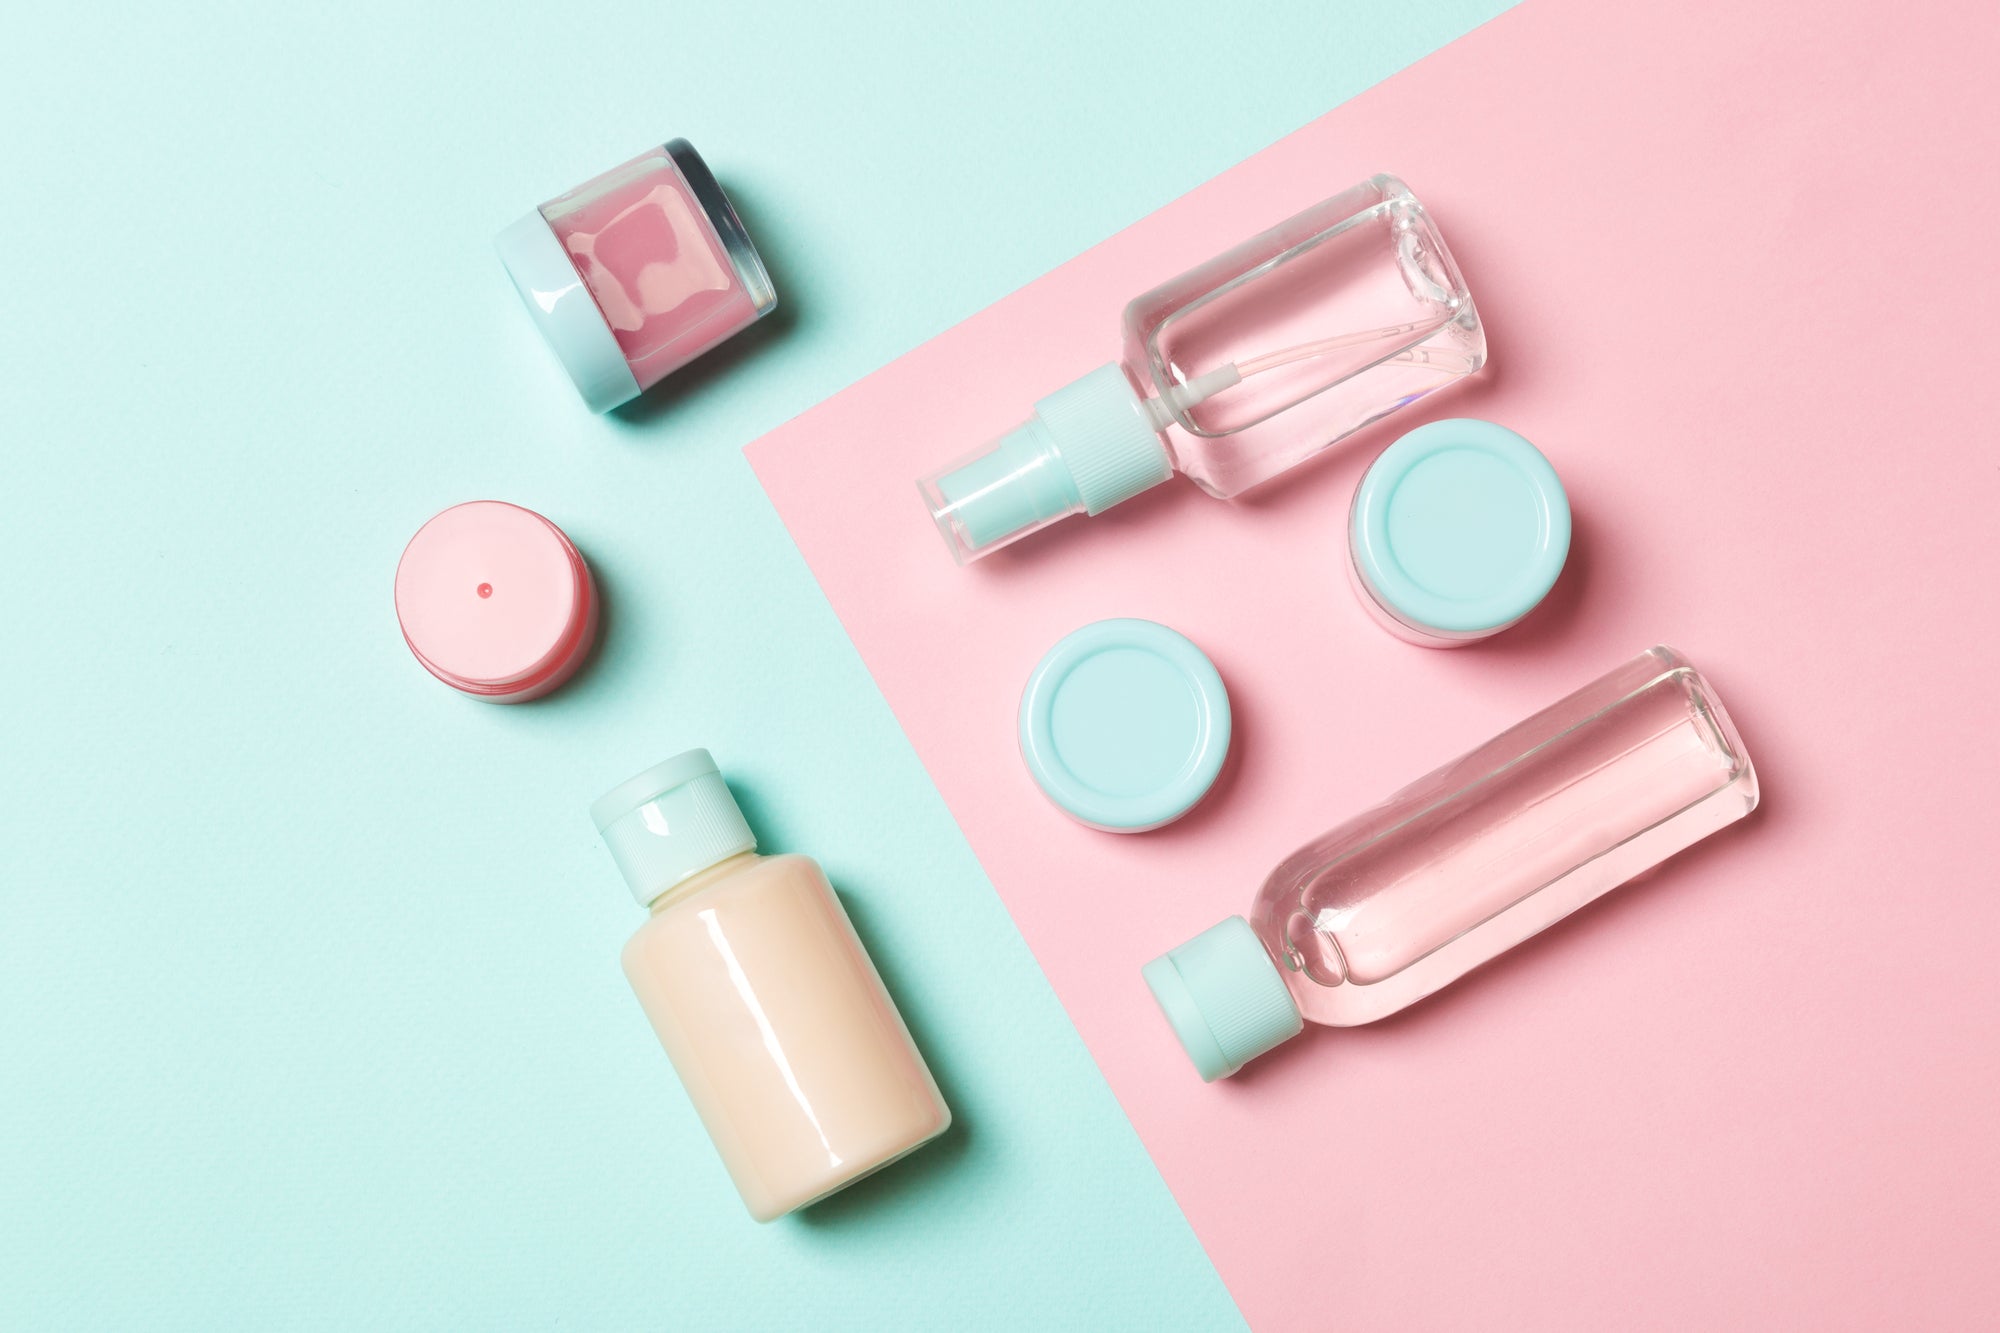 Shop for Korean Makeup, Beauty and Skin Care Online